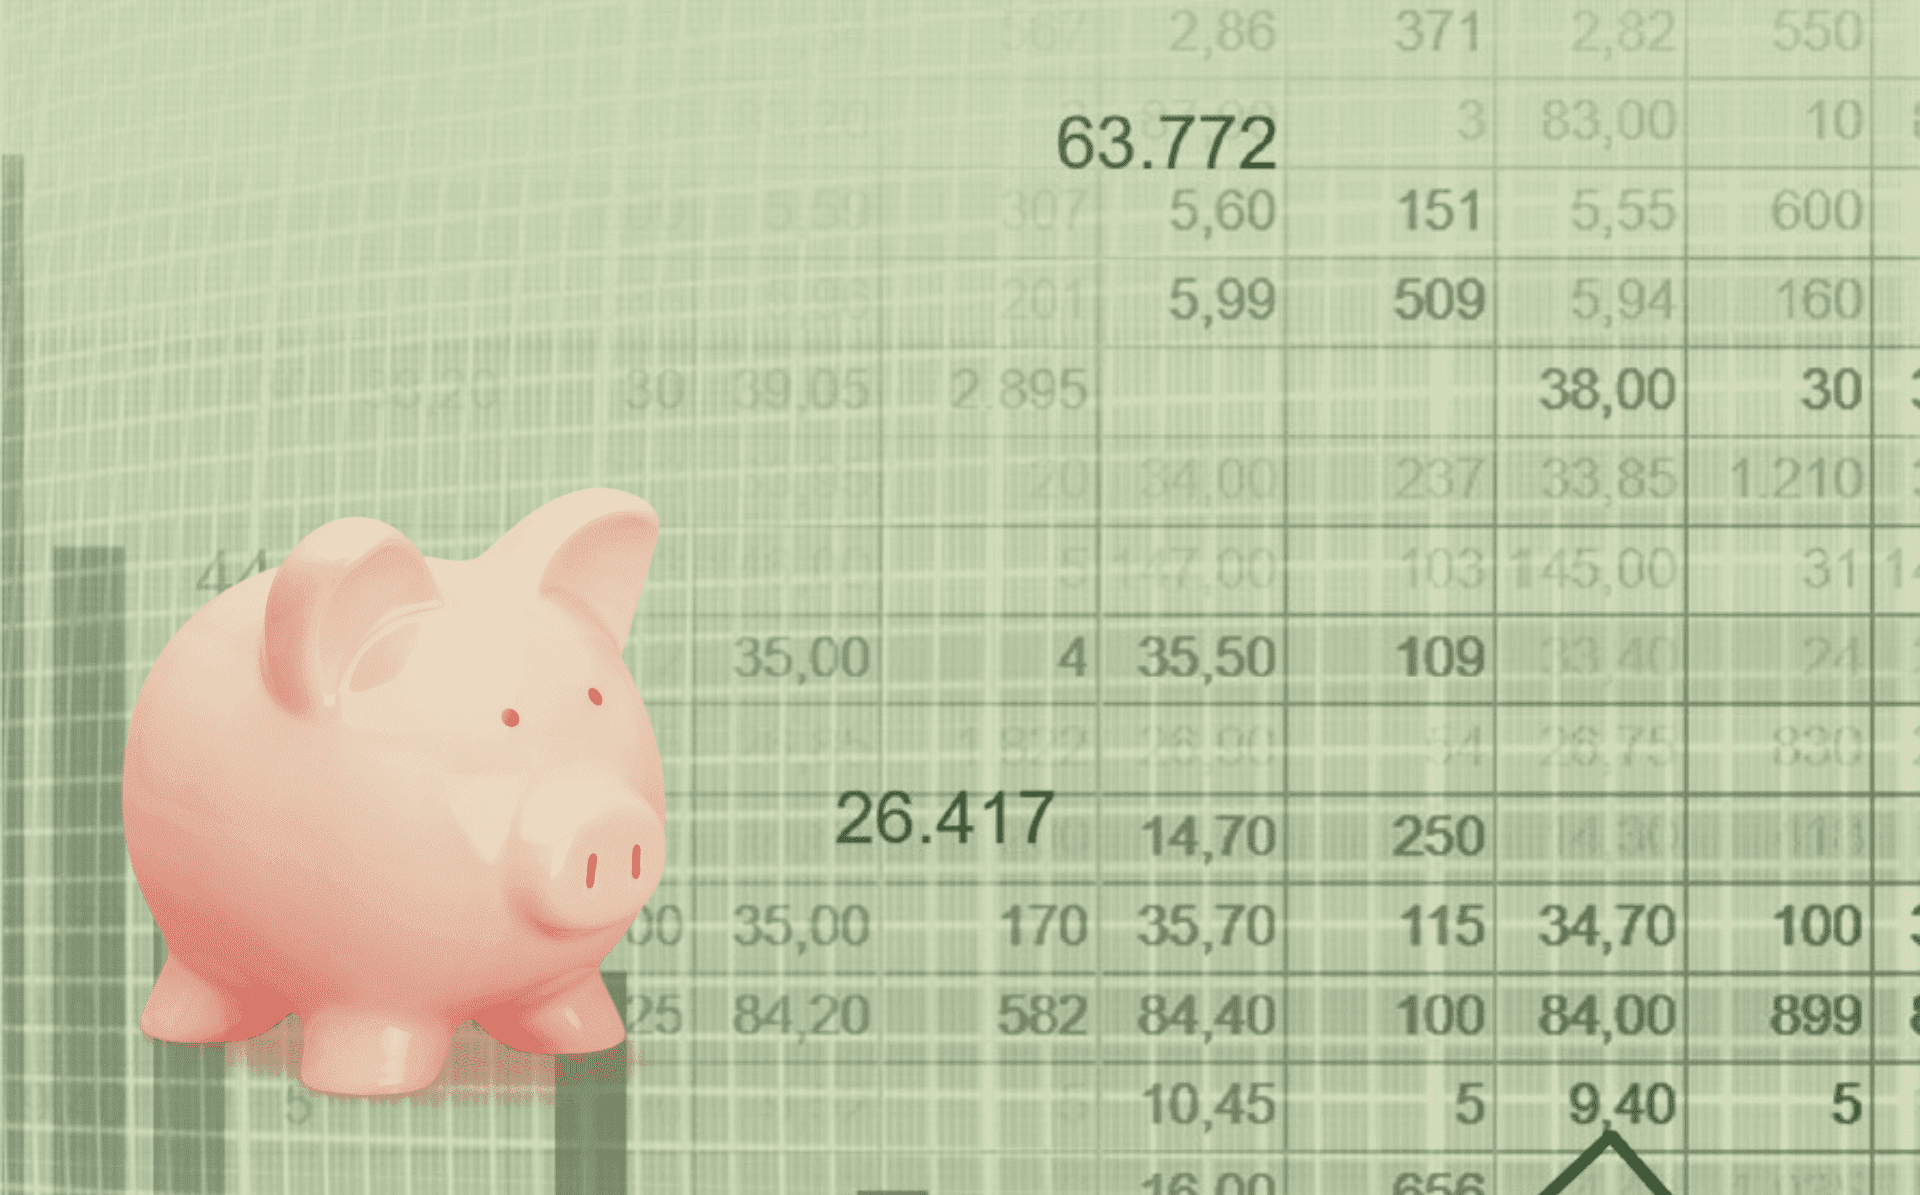 A small pink piggy bank is pictured, with a balance sheet in green behind it, illustrating the financial goals and personal finance.